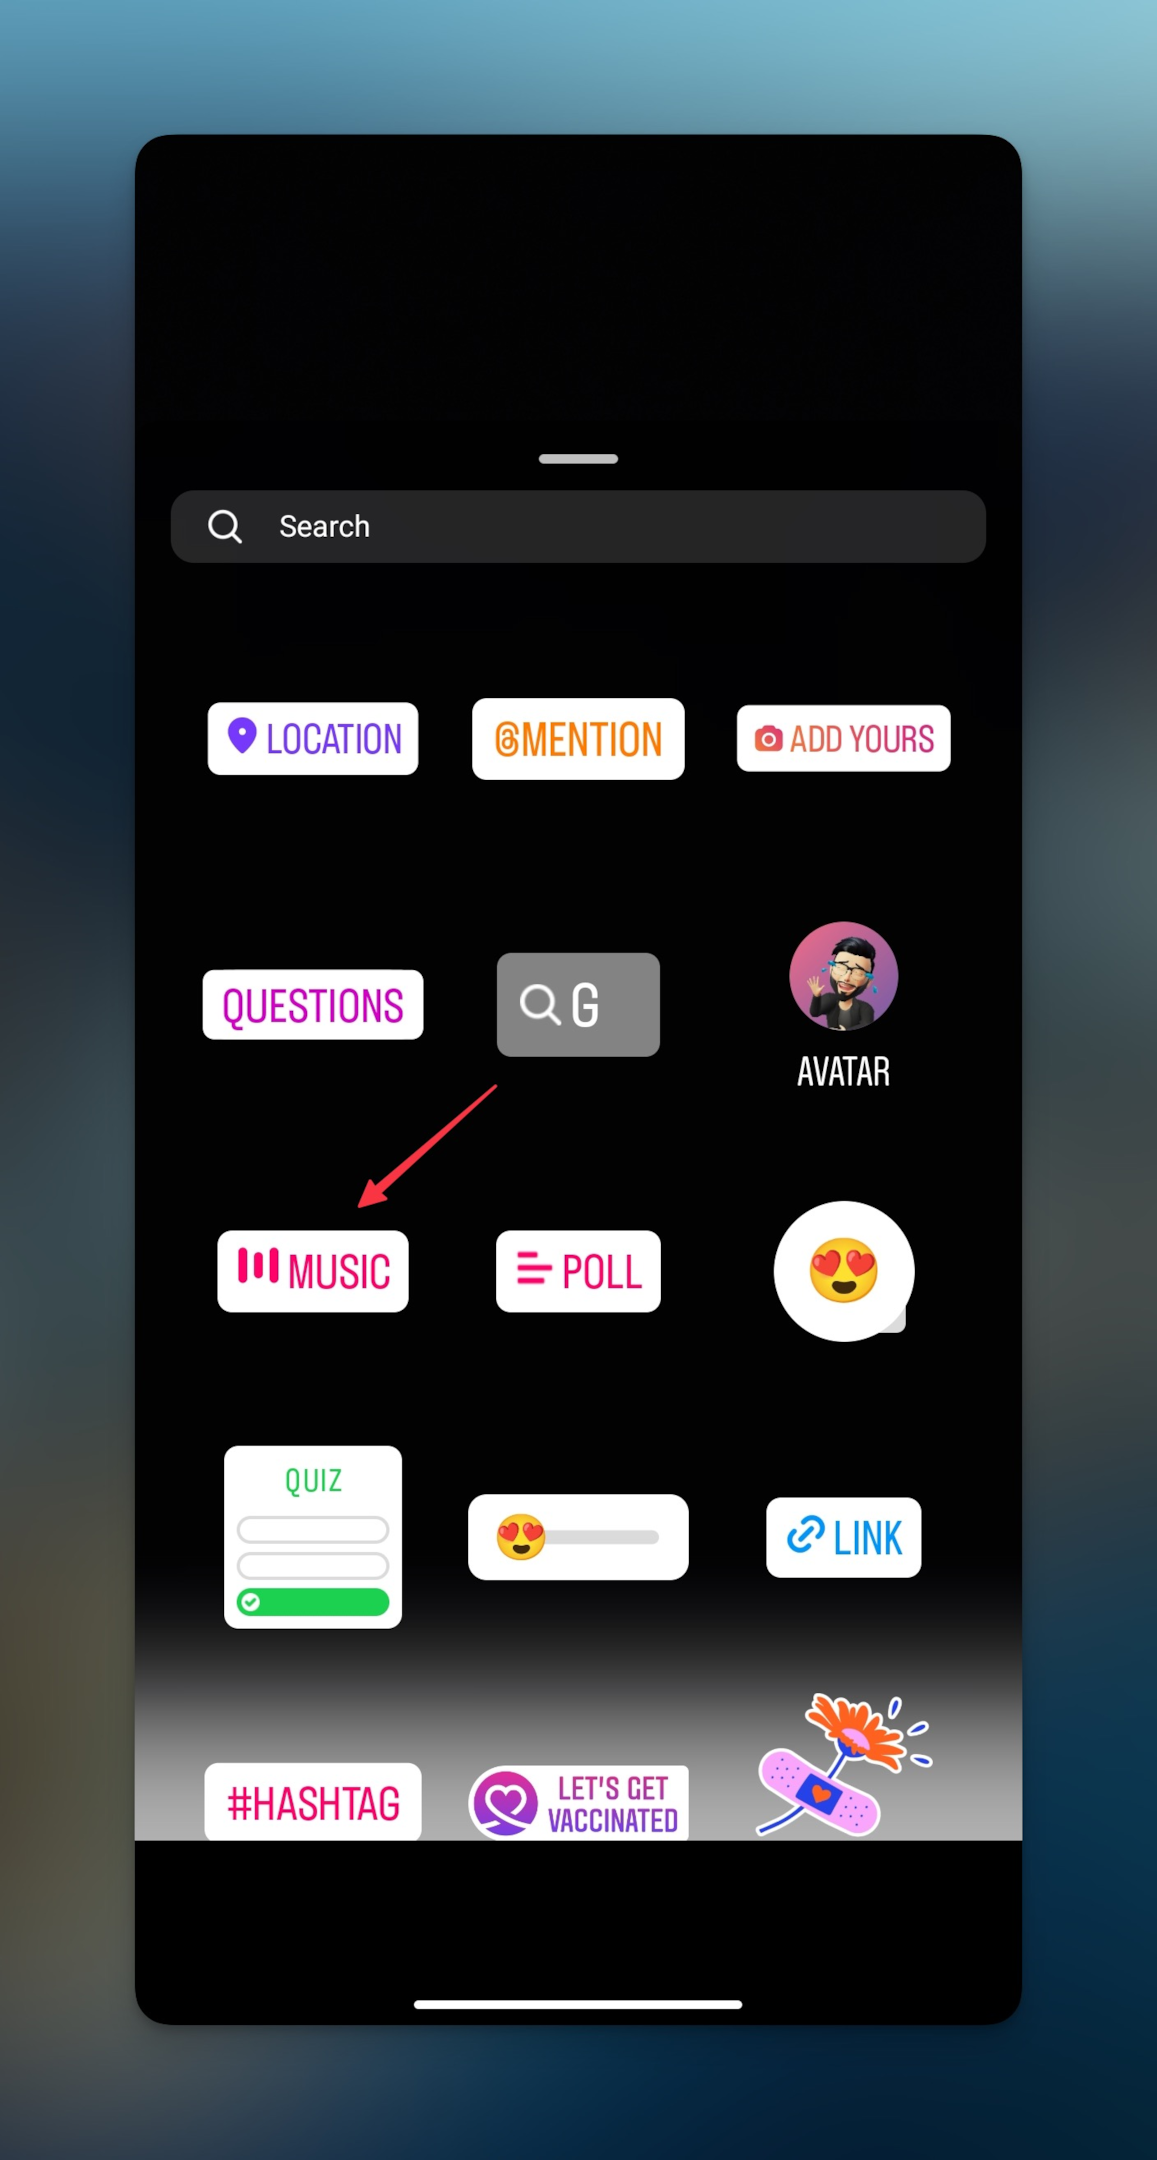 Remote.tools shows how to add music sticker to your Instagram stories